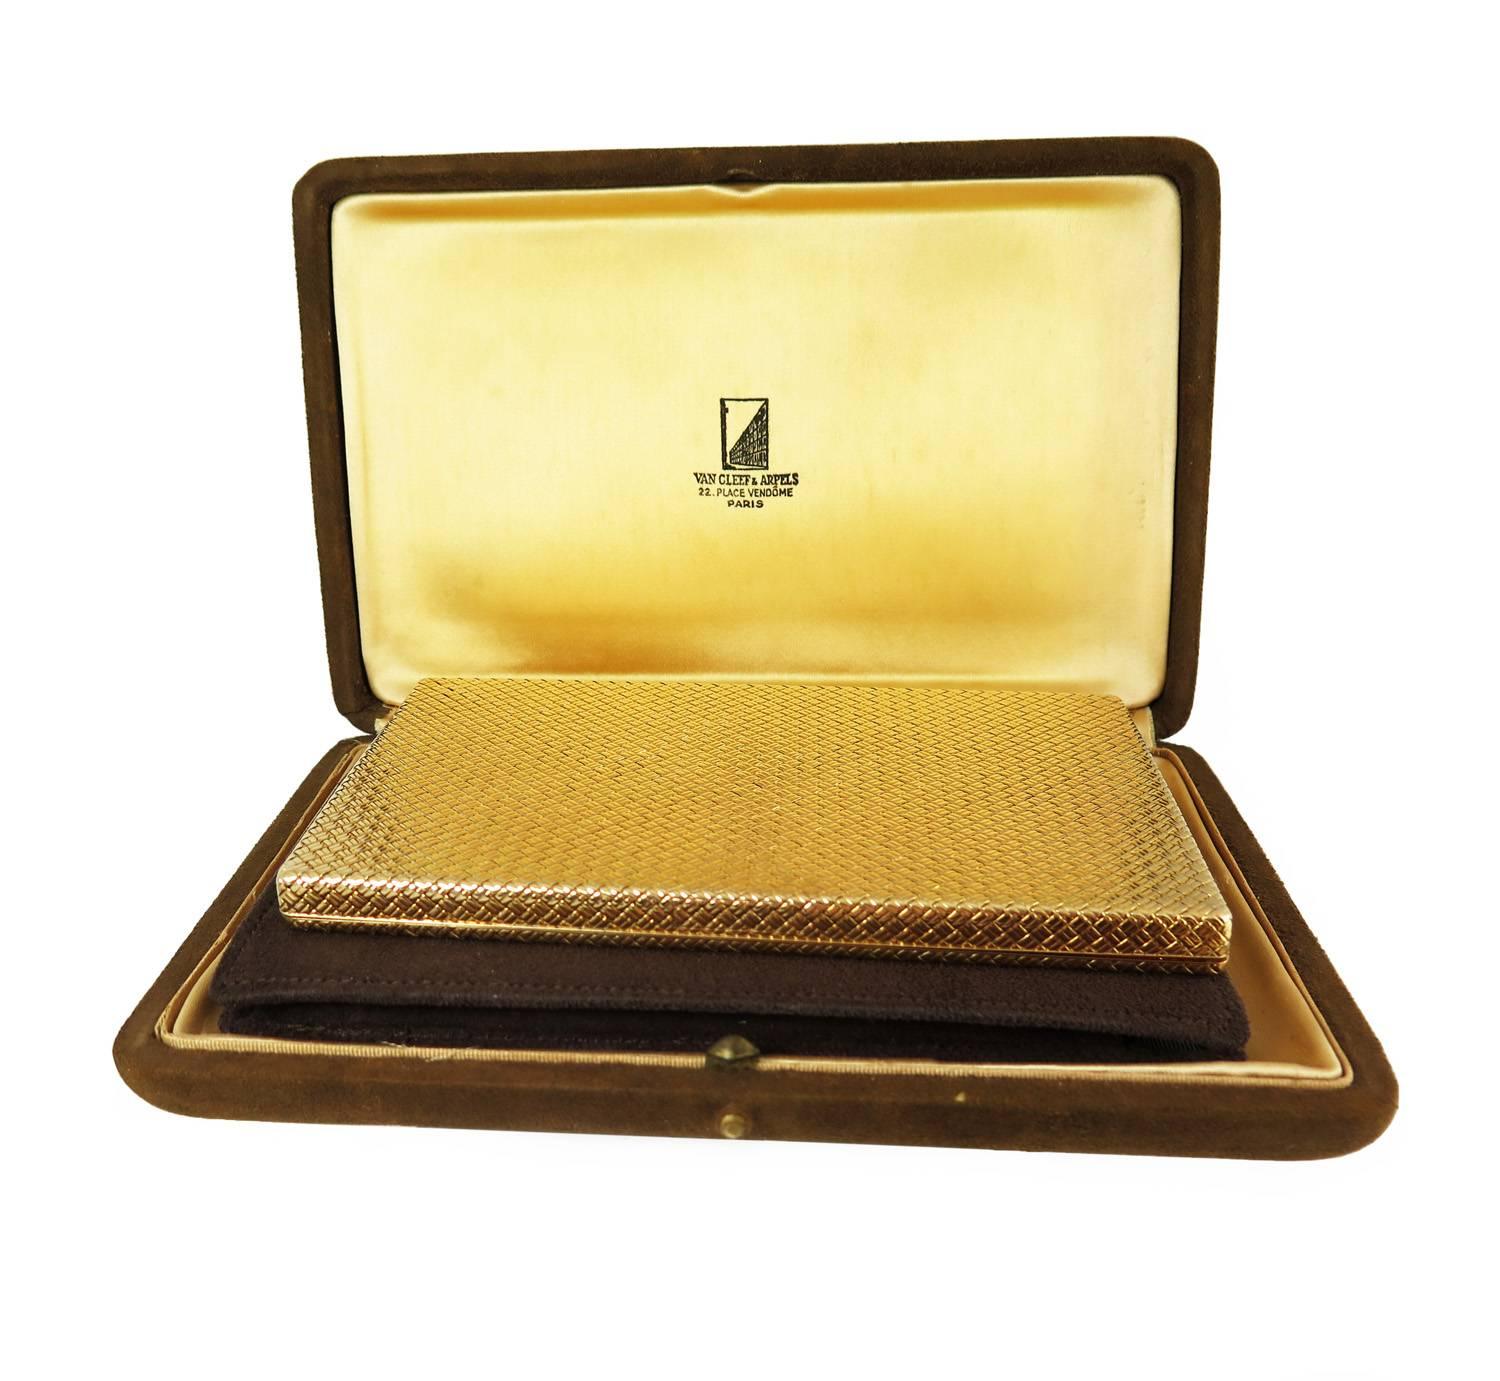 A slim, elegant modernist 18k yellow gold box with textured basketweave design, by Van Cleef & Arpels. Signed, with two inventory numbers and French hallmarks. In original suede pouch and fitted box. 